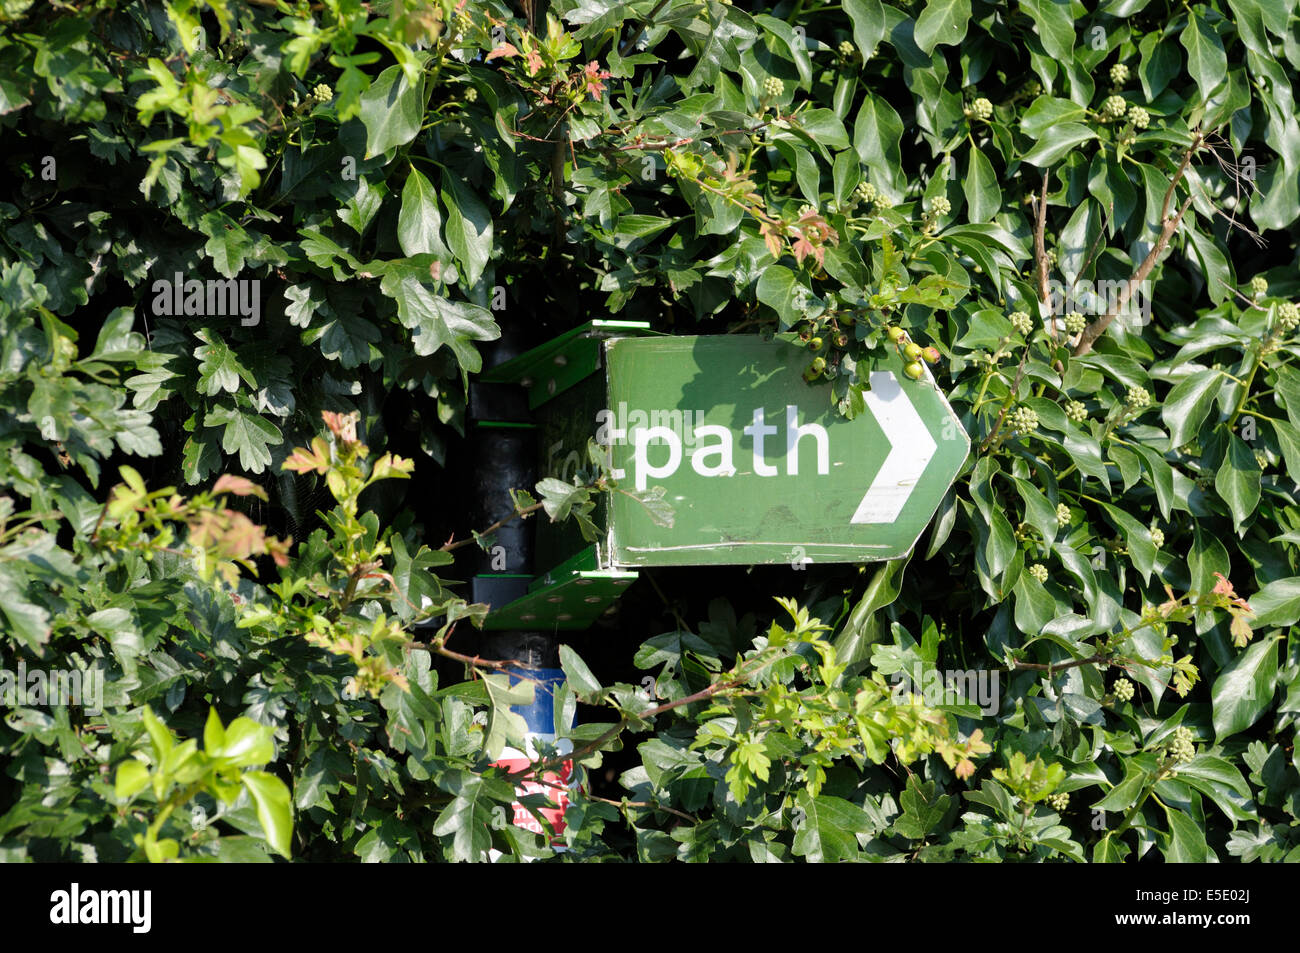 Public Footpath sign, bent and half obscured by a hedge (Kent, England) Stock Photo